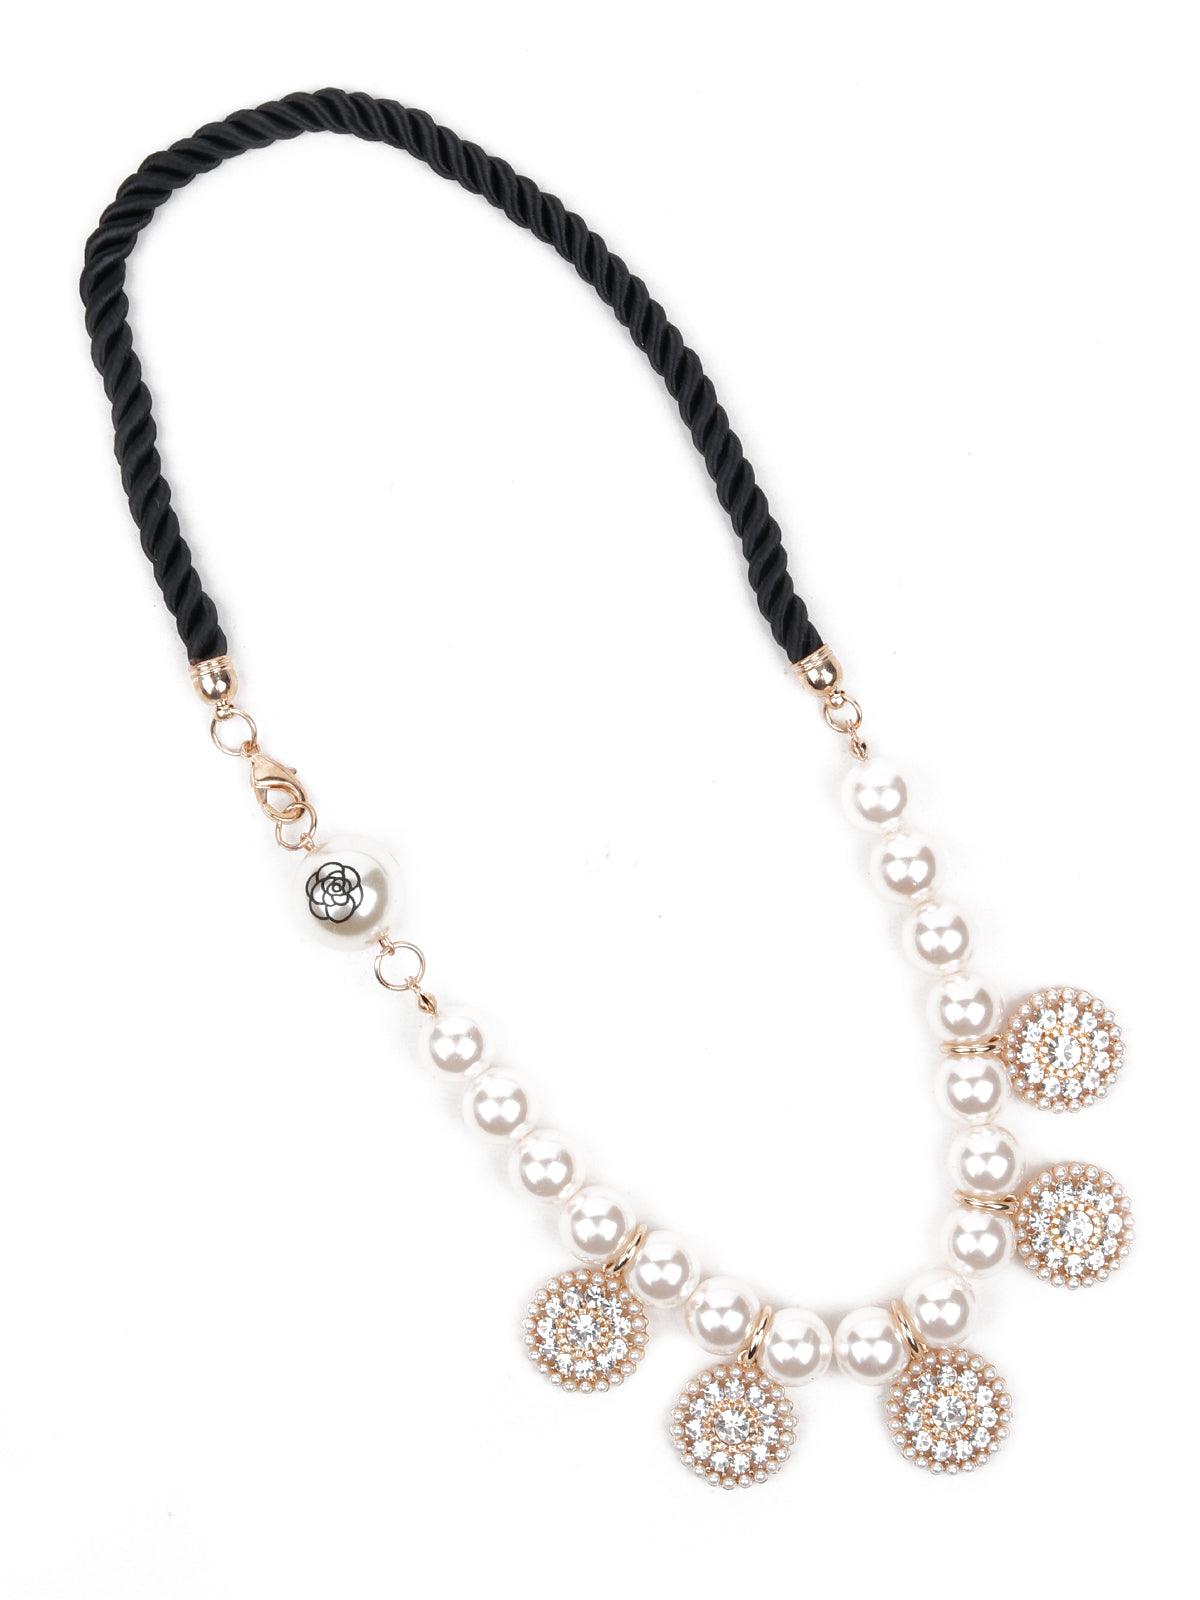 Women's Pearl Necklace Embellished With Charms - Odette